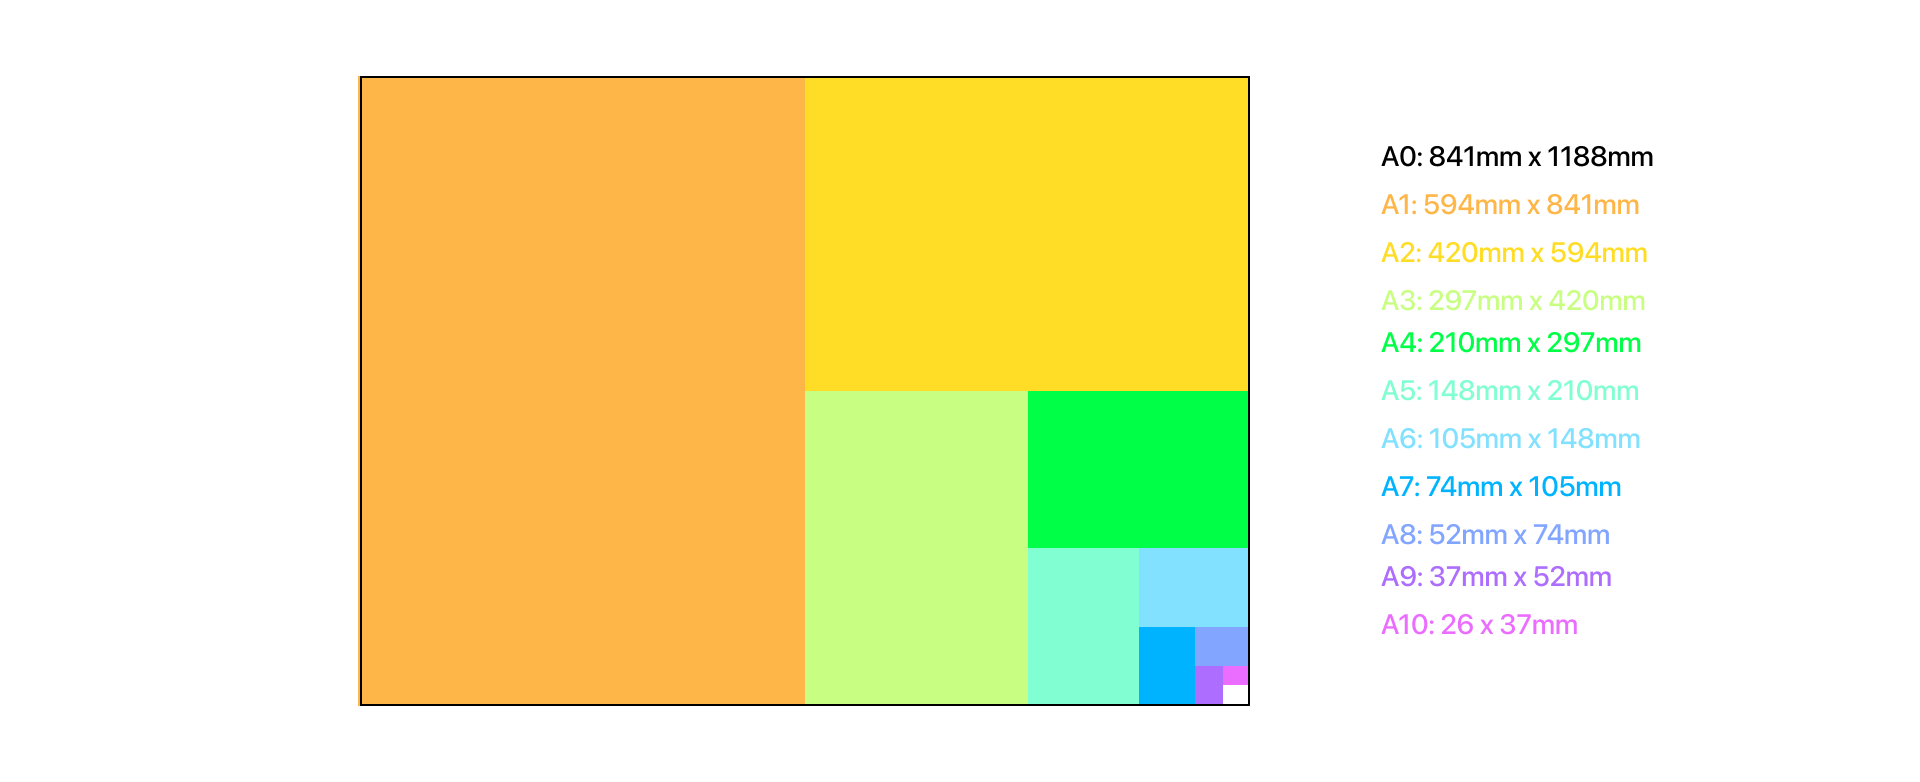 A visual representation of A0 to A10 paper size dimensions using a color-coded diagram